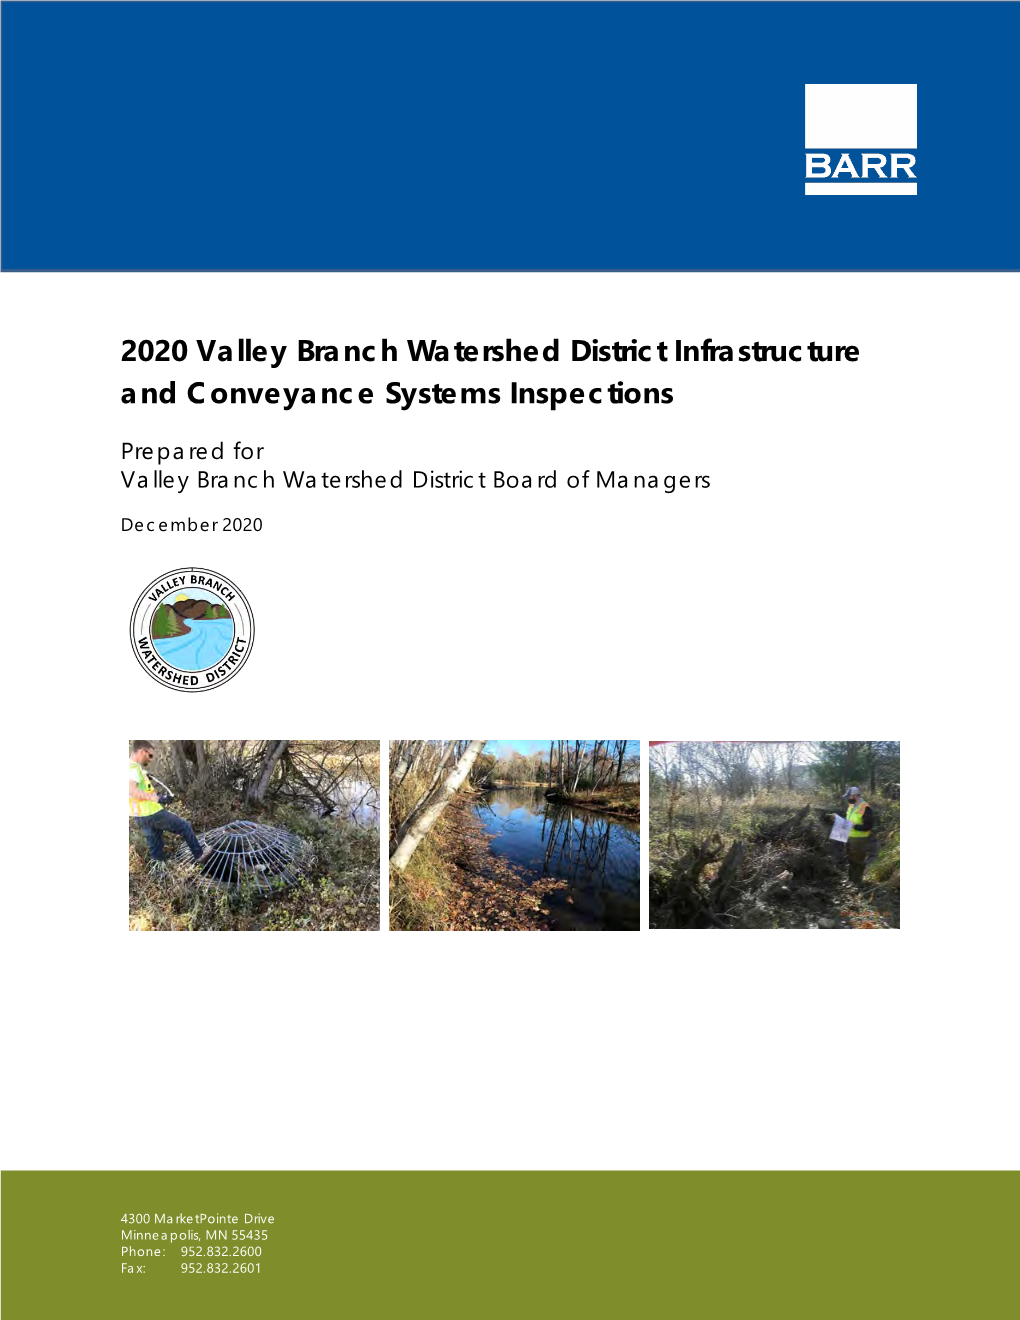 2020 Valley Branch Watershed District Infrastructure and Conveyance Systems Inspections